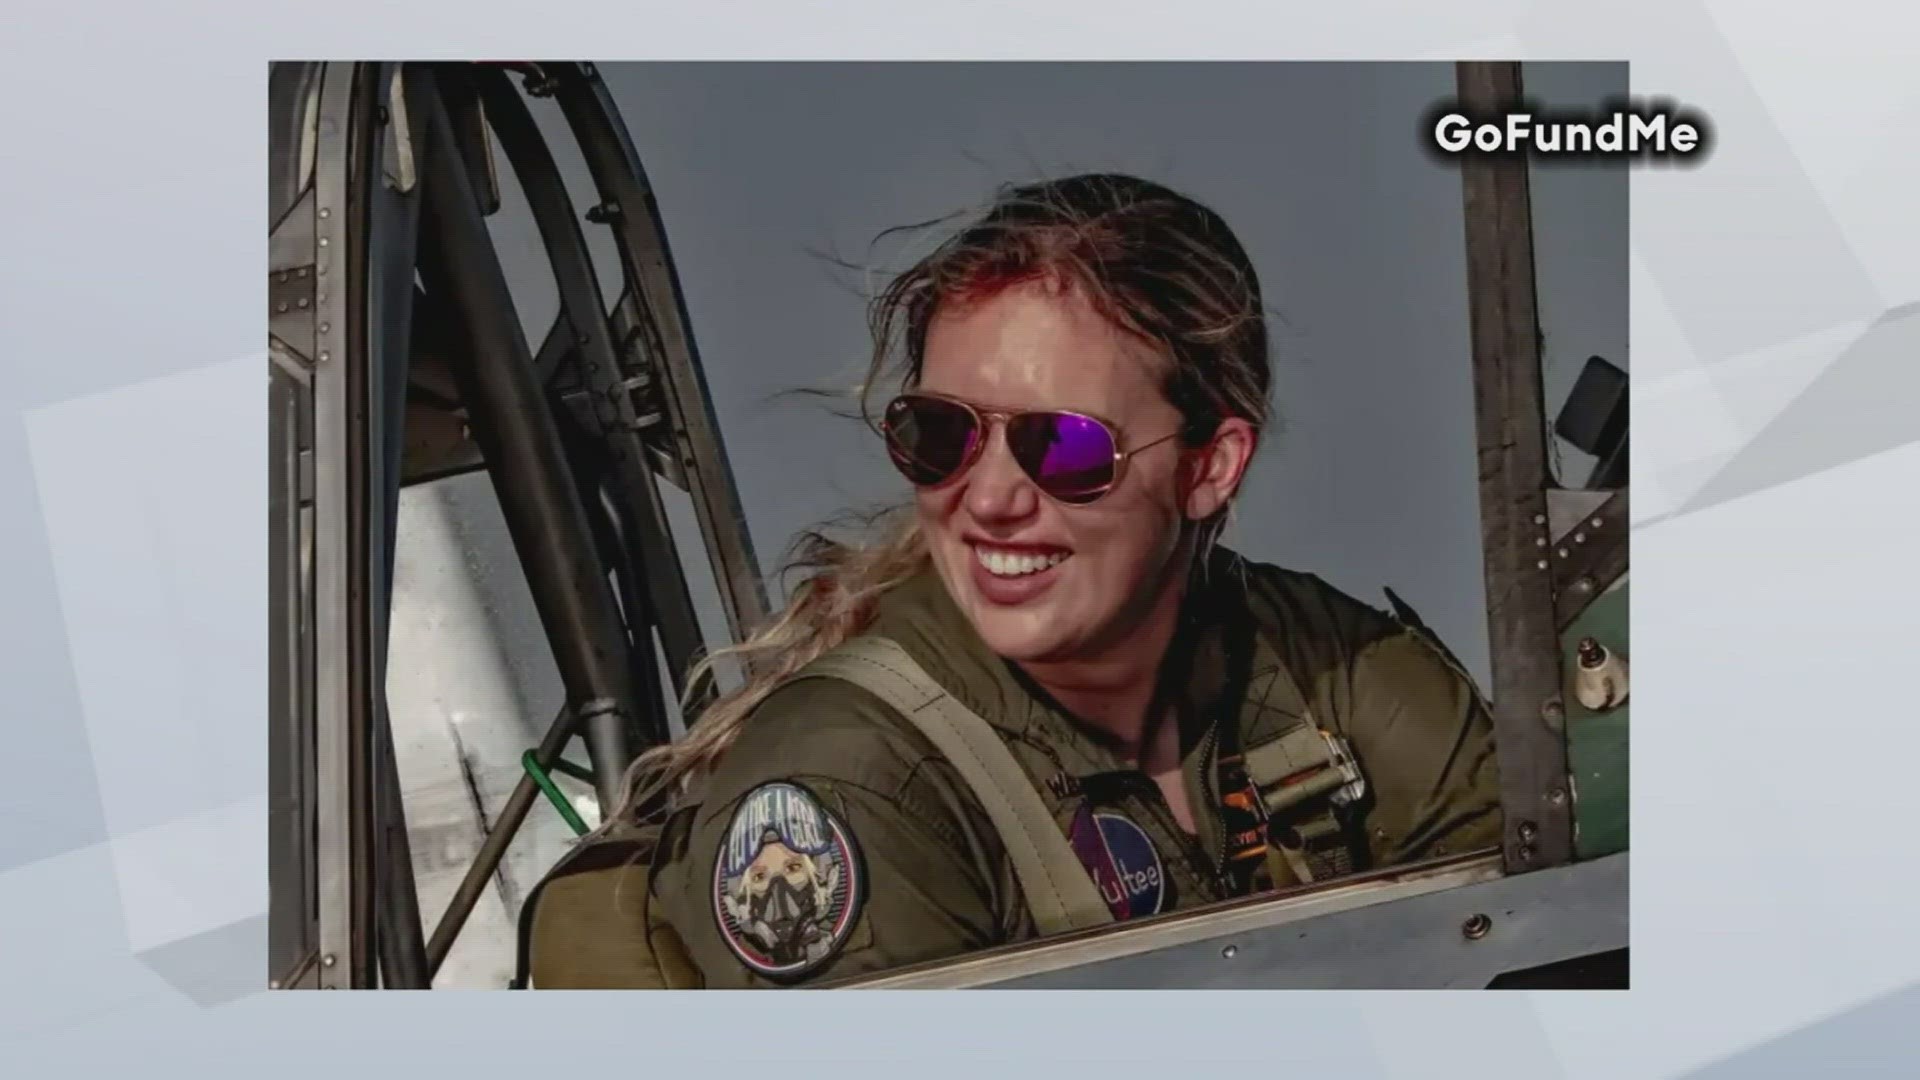 The aviation community and the family of Devyn Collie Reiley are mourning after the crash and carrying on her work in preserving military aircraft and their history.